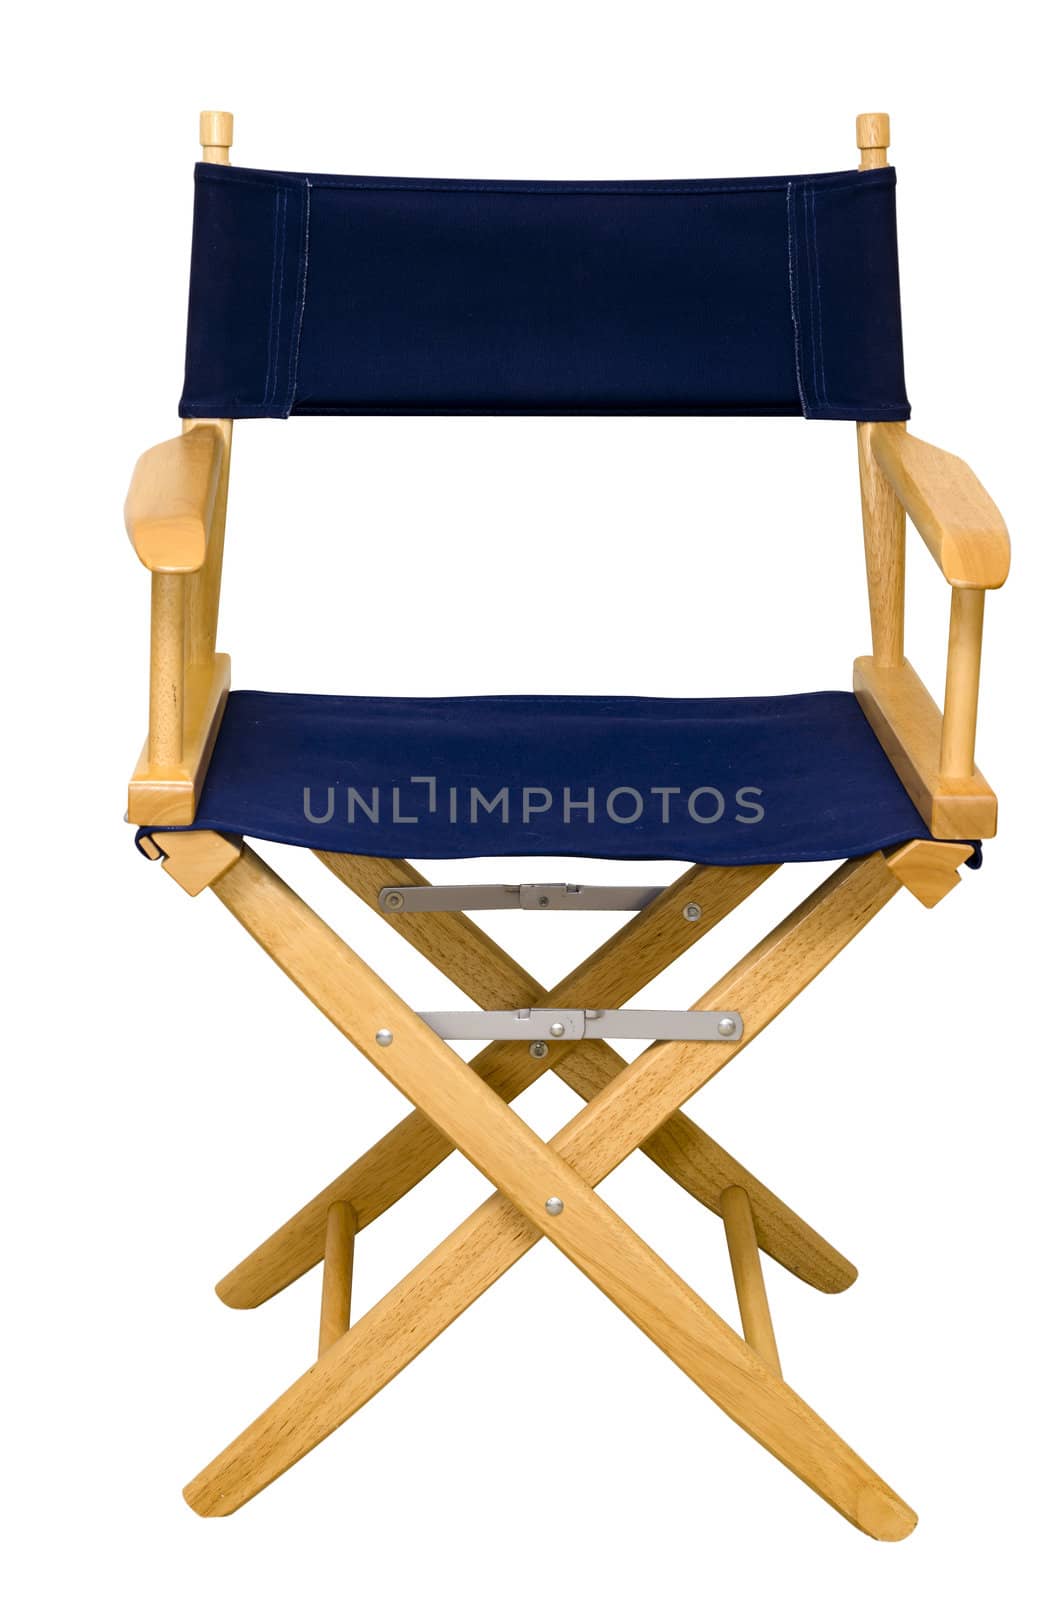 Director's chair isolated on white background with clipping path.